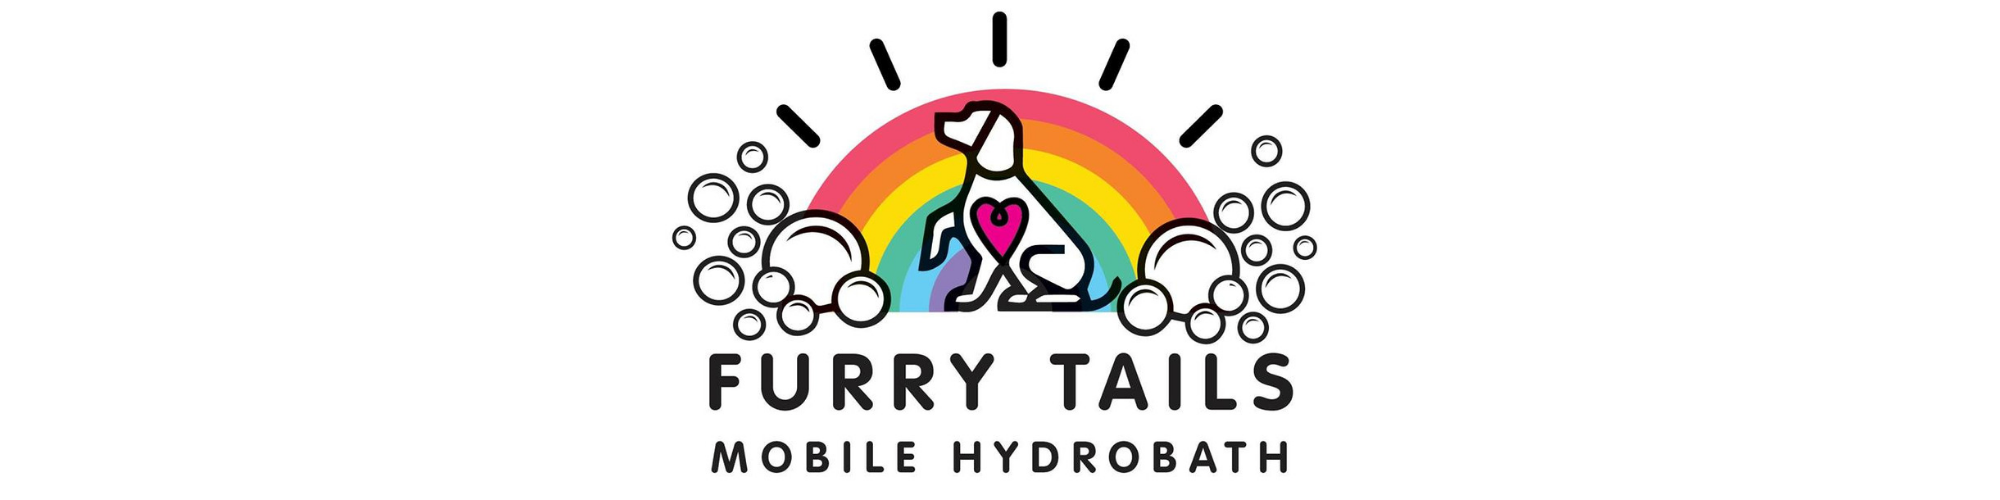 Furry Tails Mobile Hydrobath is Jacqui Smith